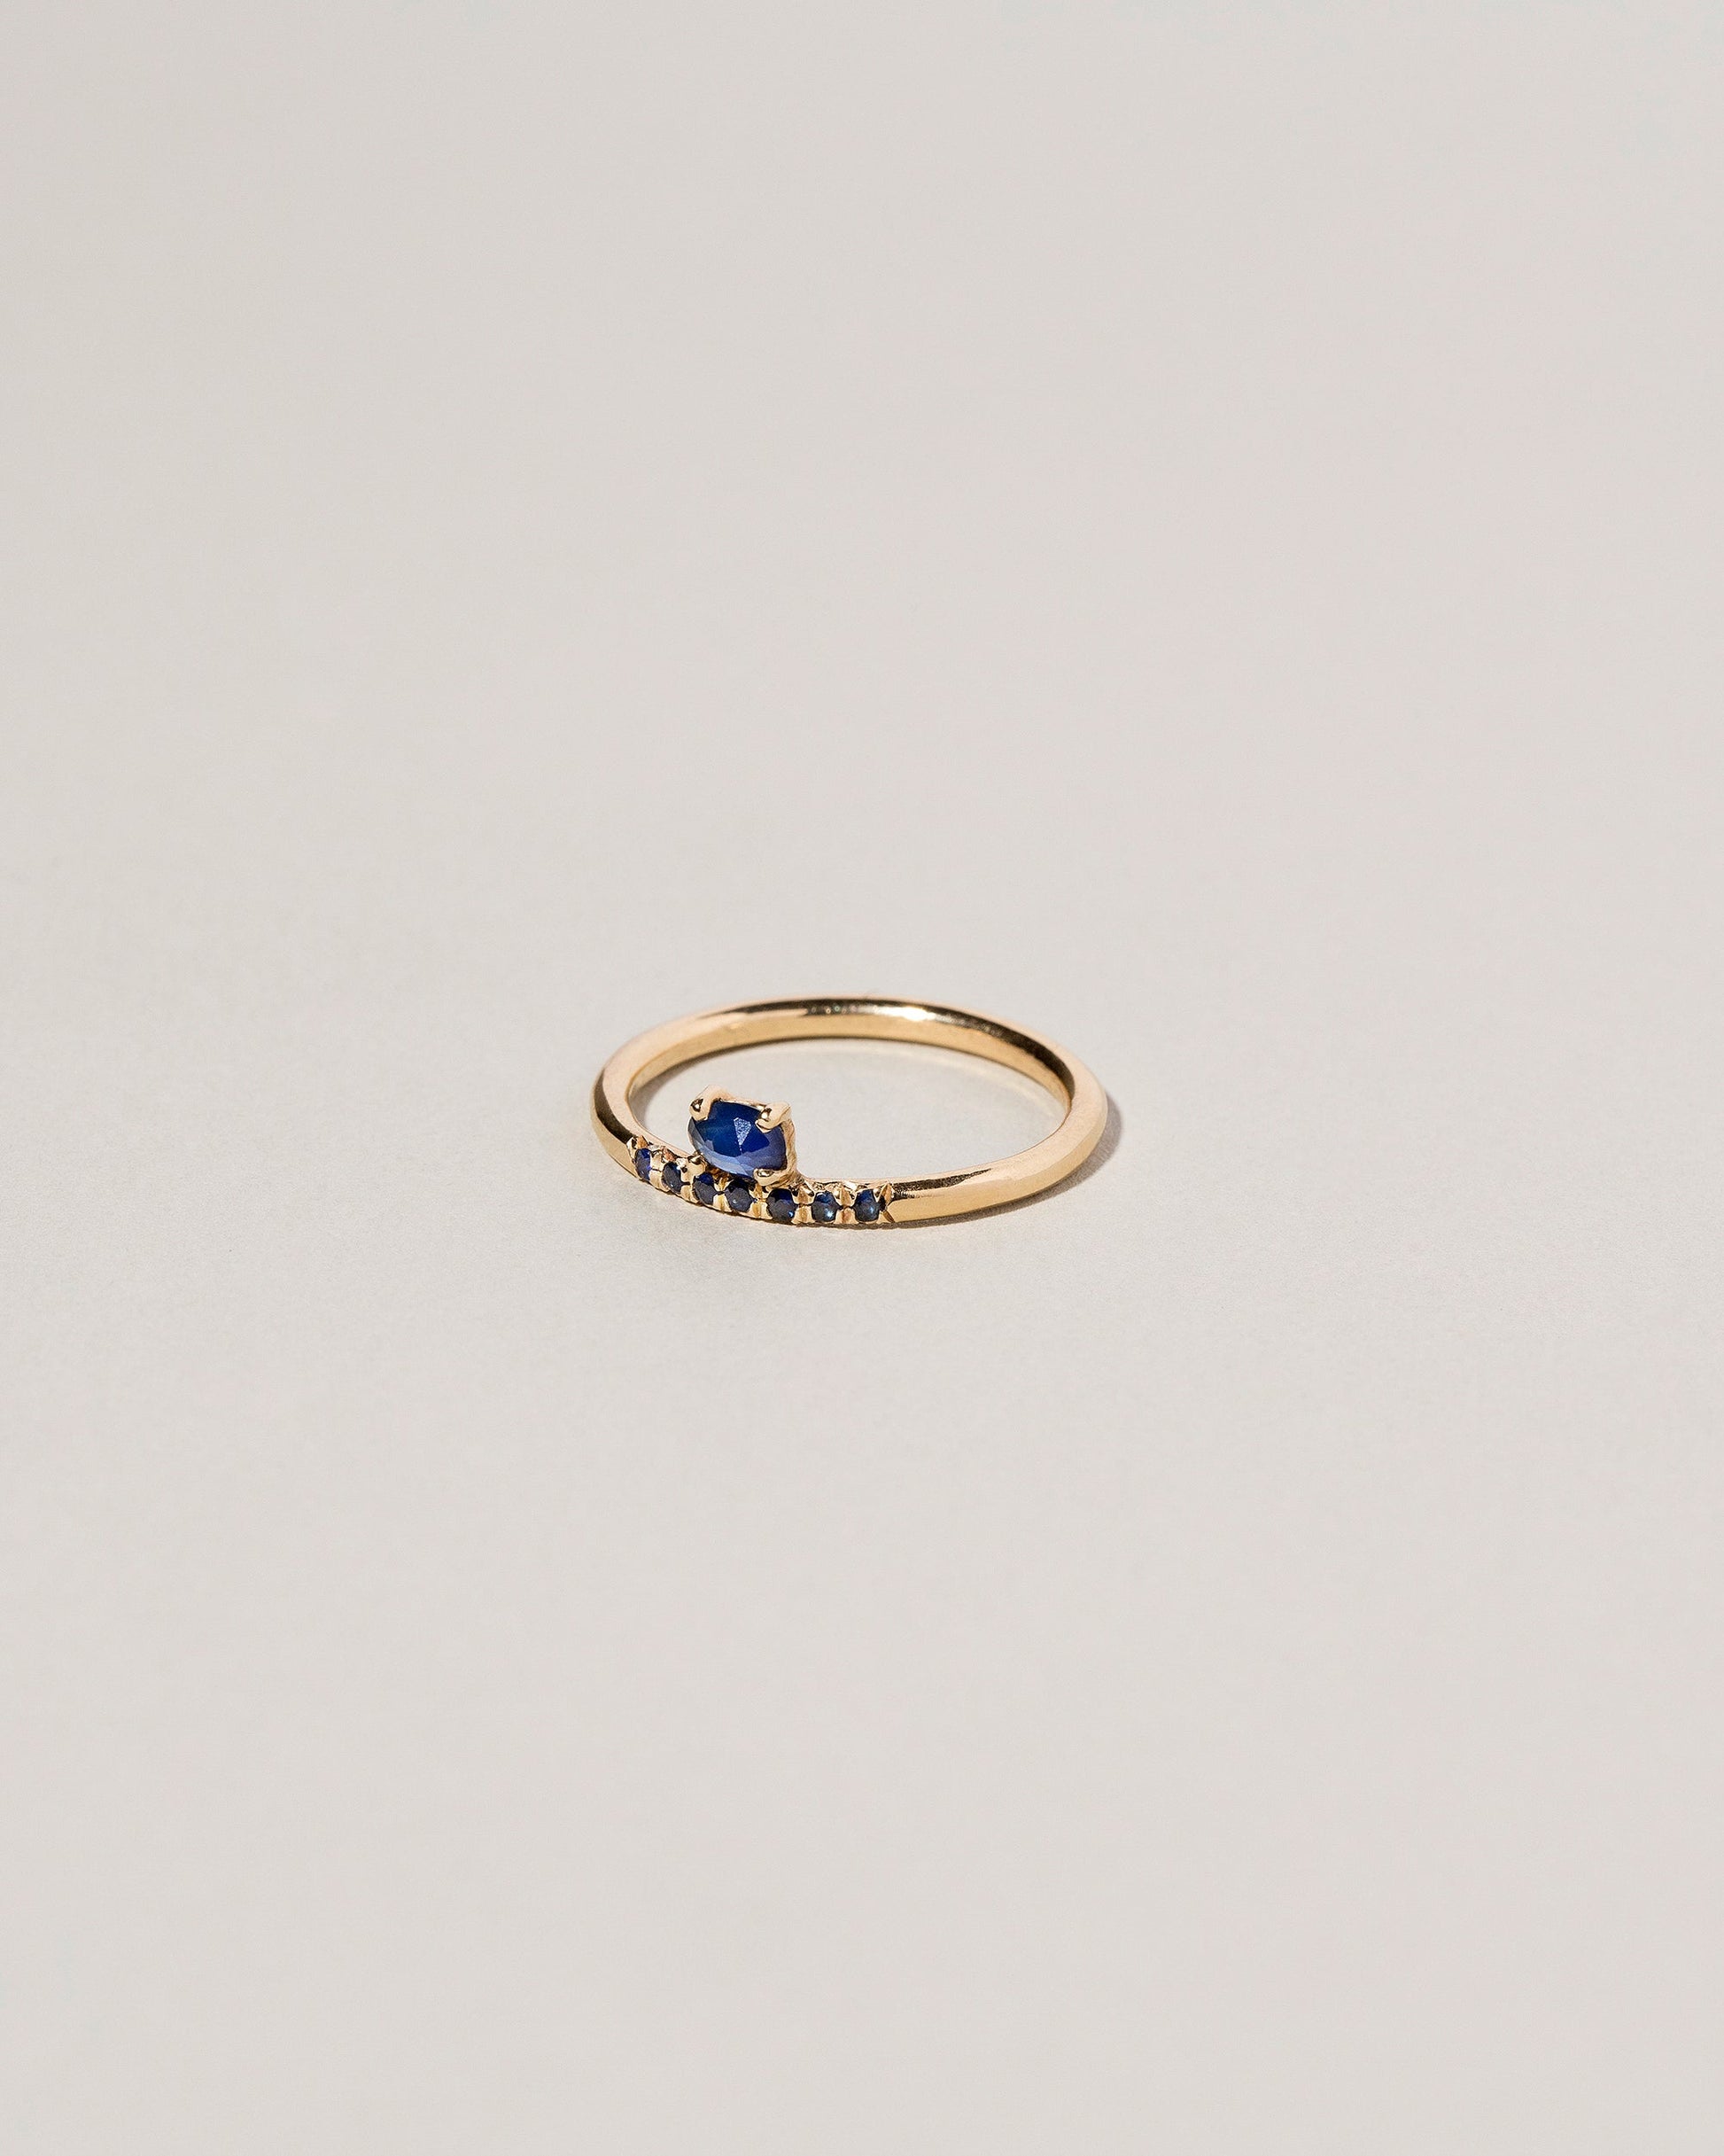  Stacked Ring - Sapphire on light color background.